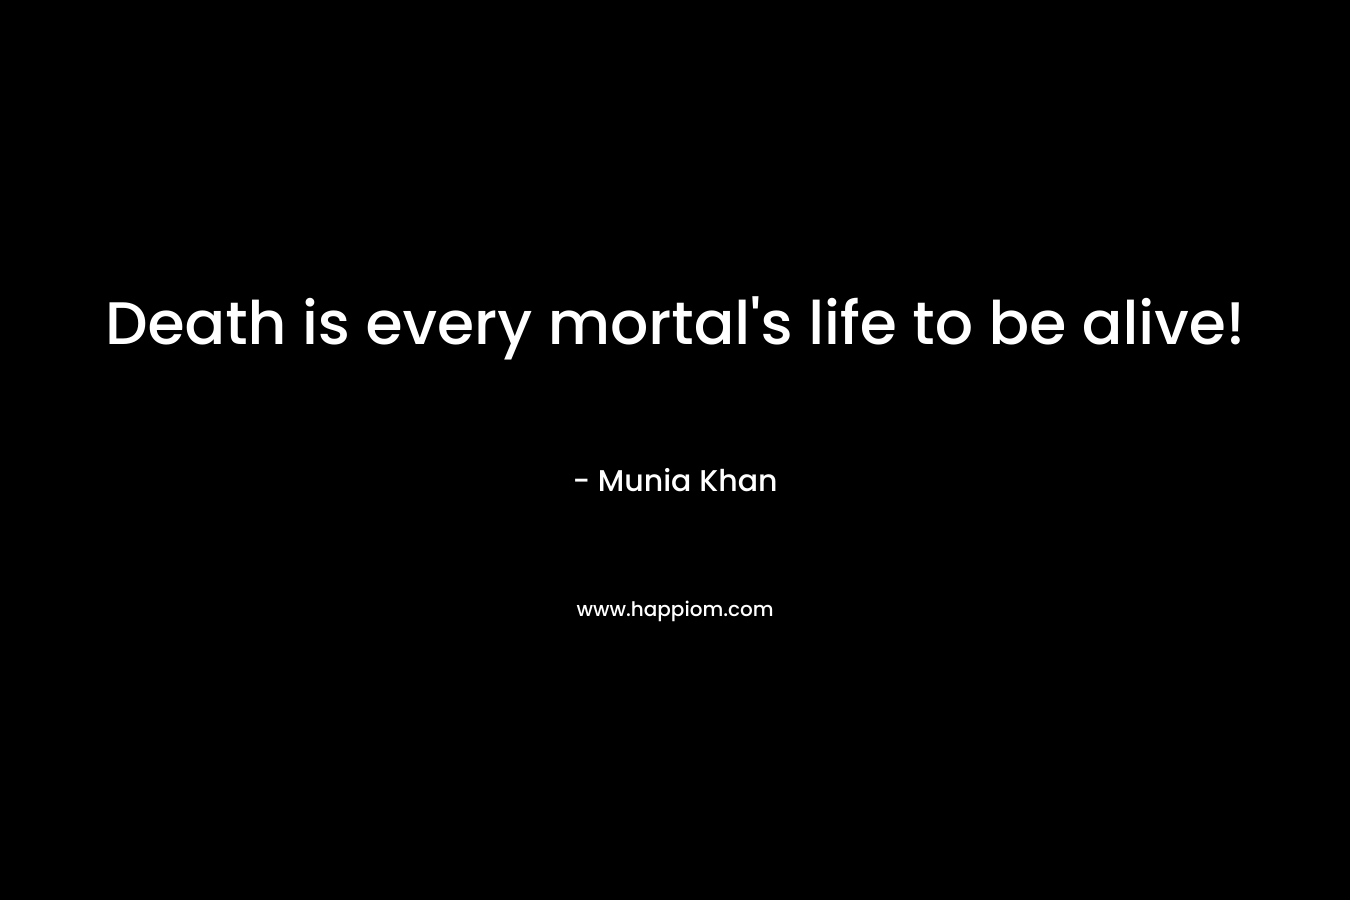 Death is every mortal's life to be alive!